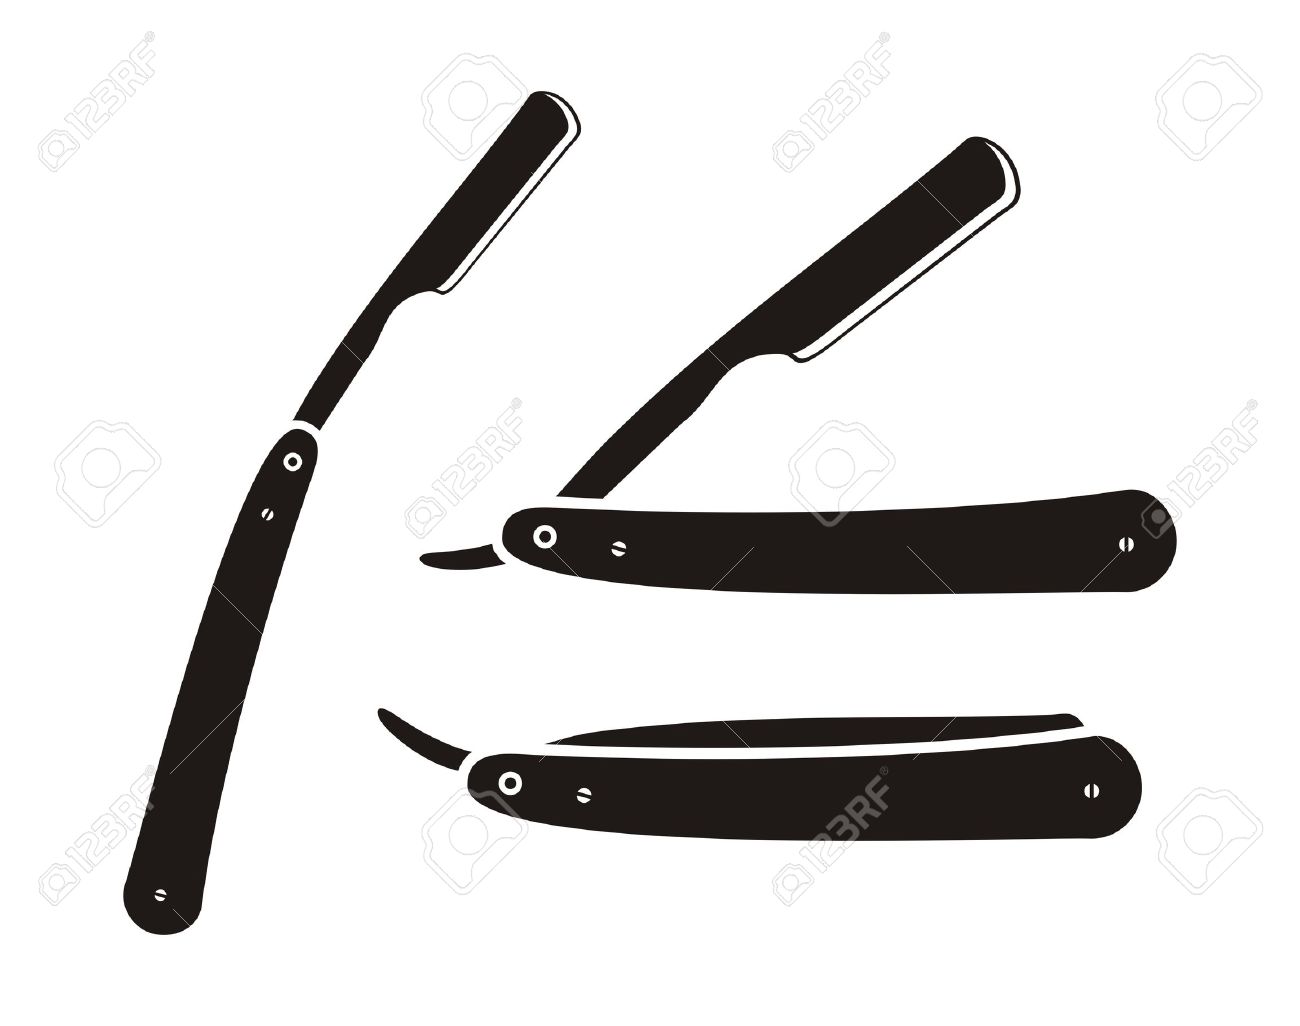 Barber clipart vector. Knife pencil and in